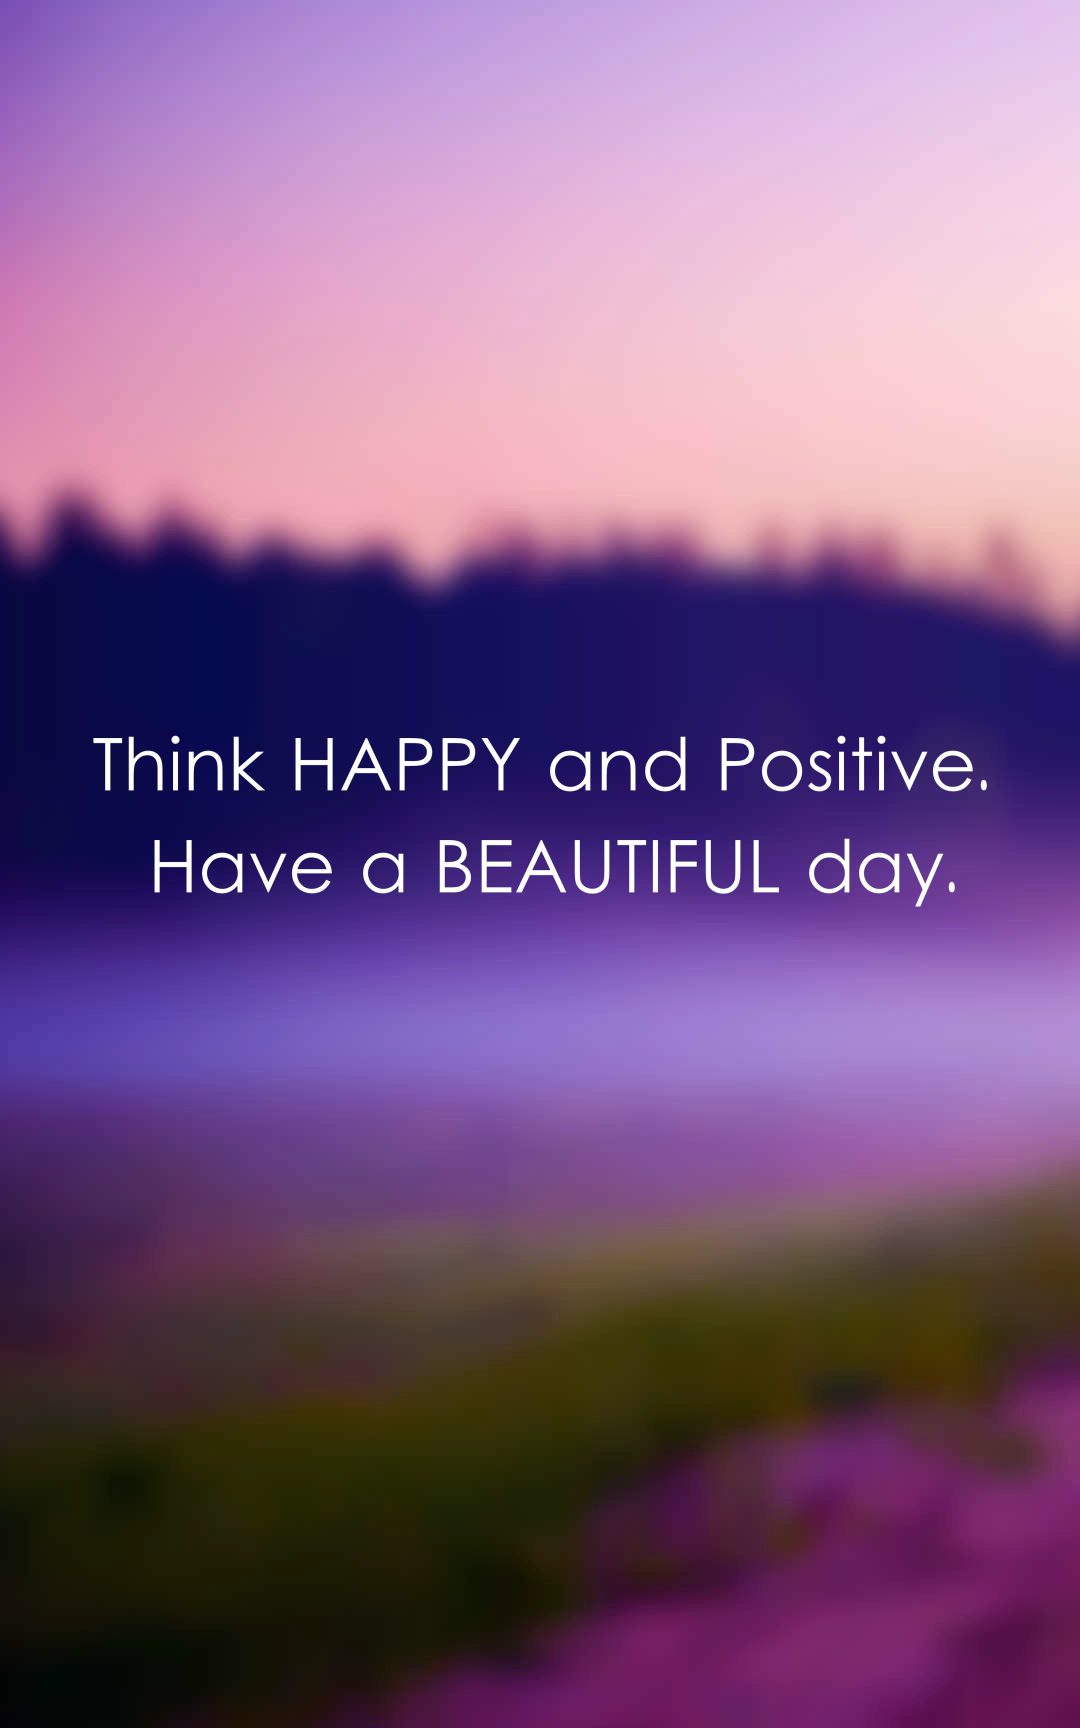 Think Happy and Positive. Have a beautiful day.